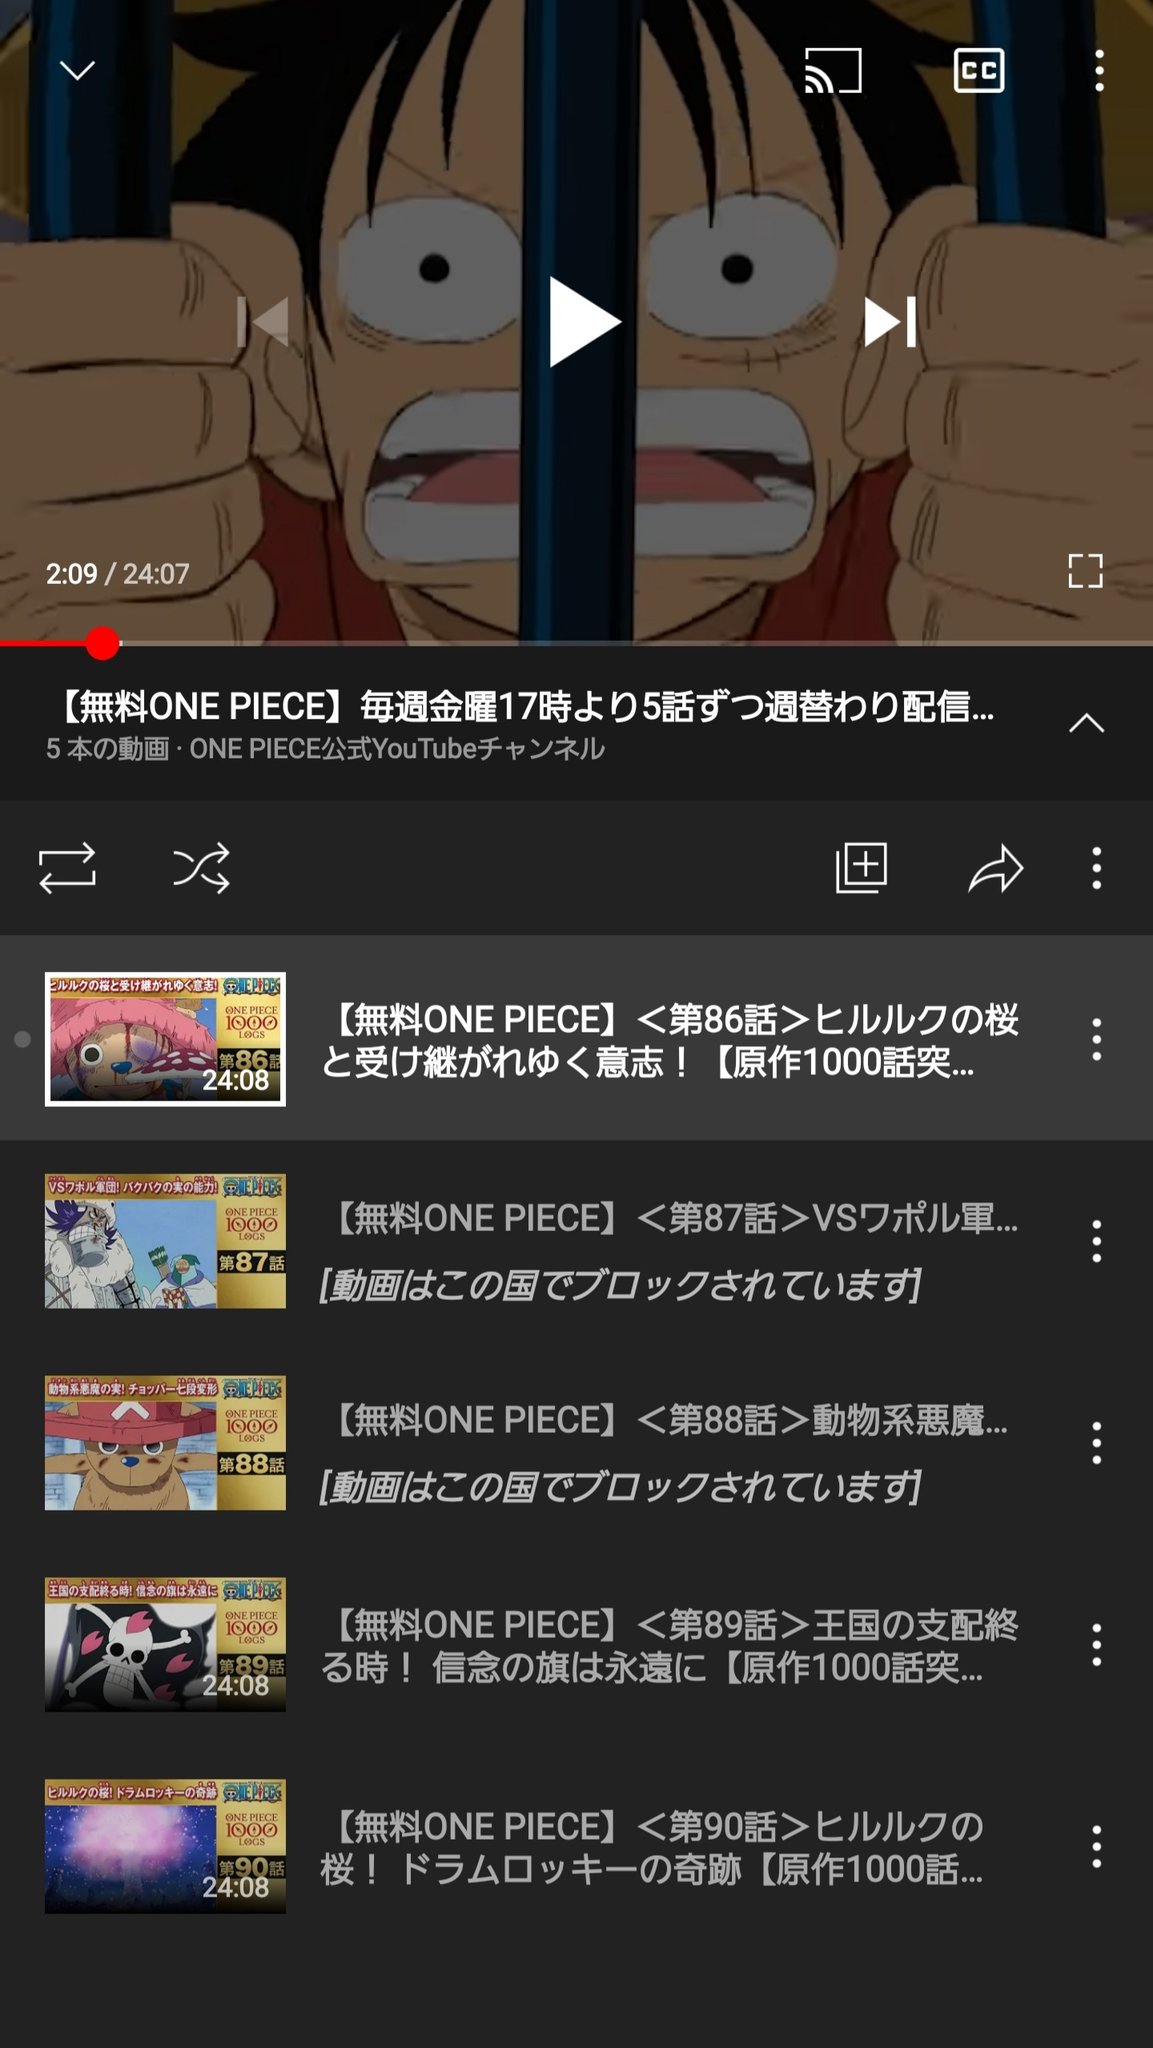 One Piece Com ワンピース V Twitter チョッパーがついに麦わらの一味の仲間に 美しく咲き誇る ヒルルクの桜 も必見 アニメ One Piece 第86話 第90話の見どころ T Co M0leruwlz0 Onepiece T Co Kzb26am7wm Twitter